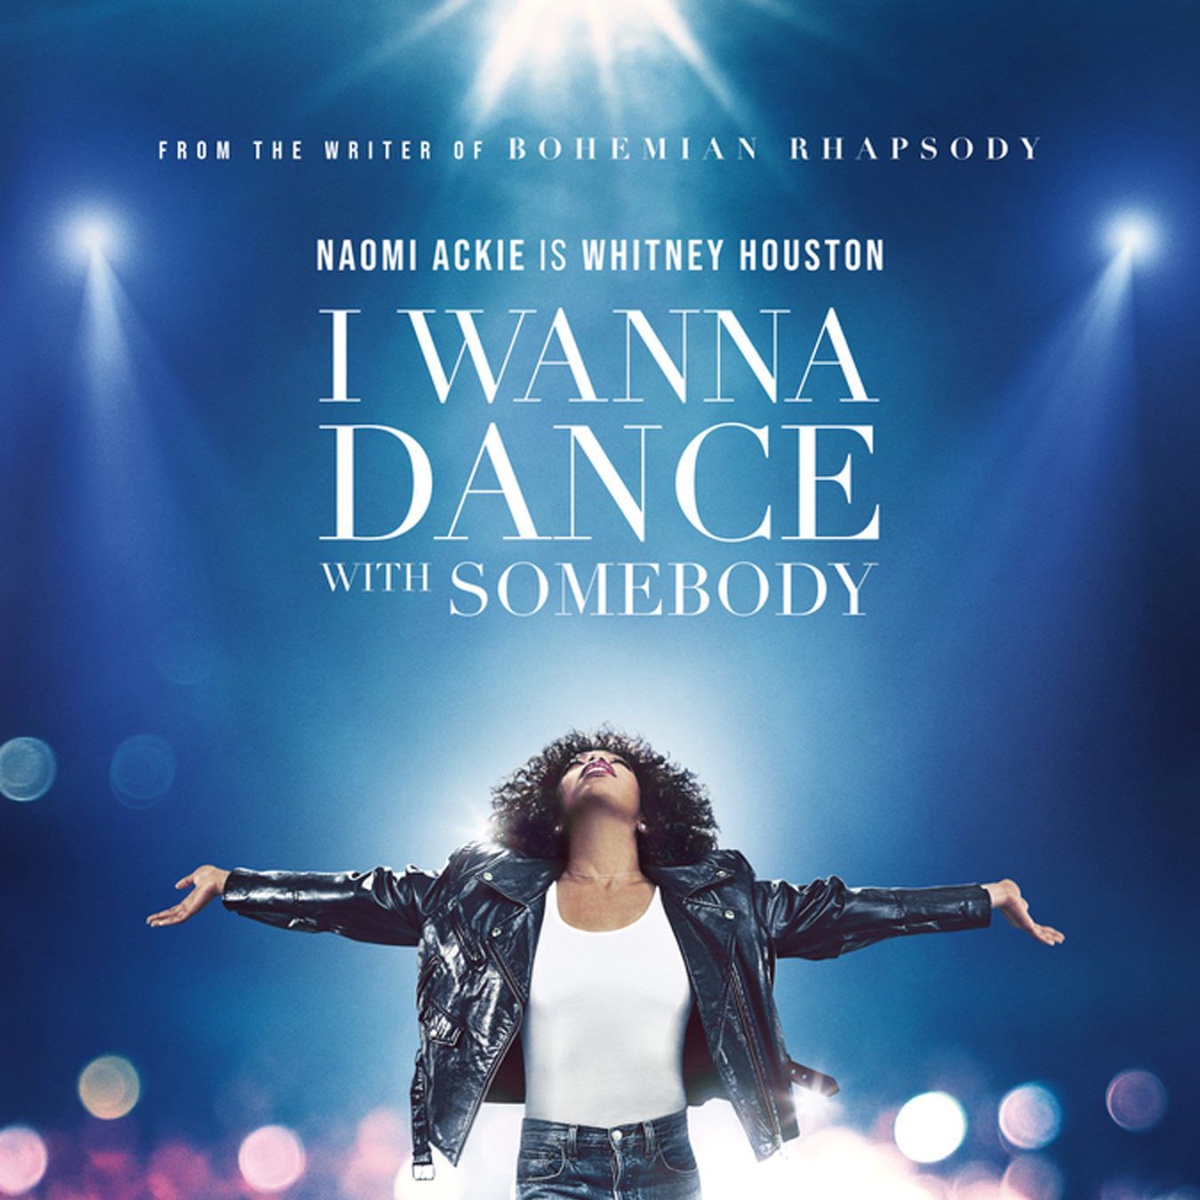 I Wanna Dance with Somebody(Who Loves Me) lyrics meaning written by Whitney Houston